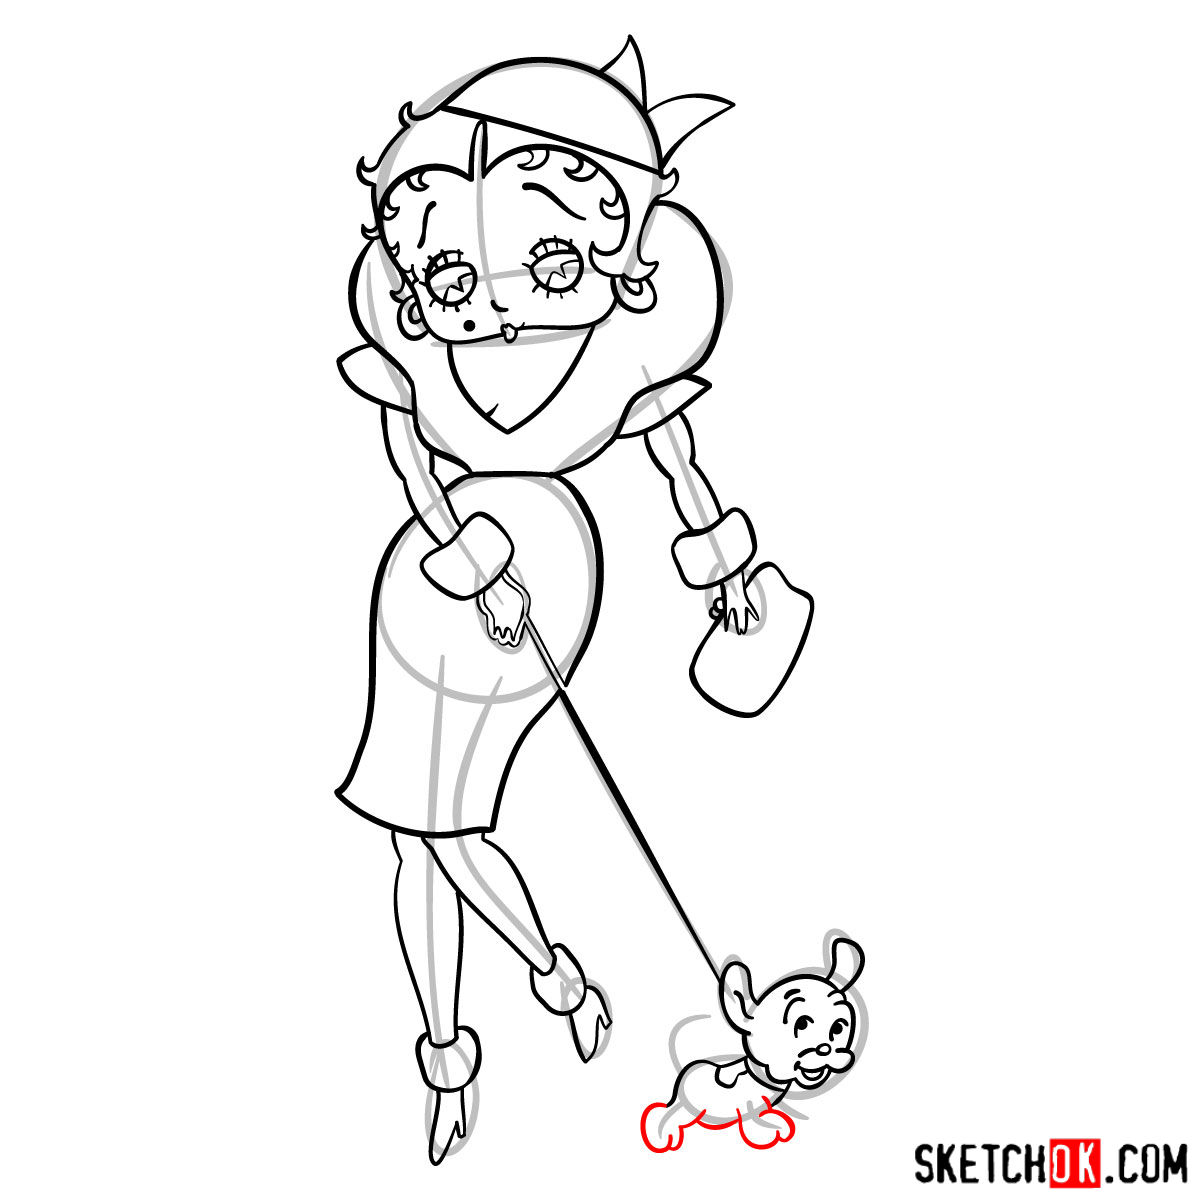 How to draw Betty Boop with her dog - step 15